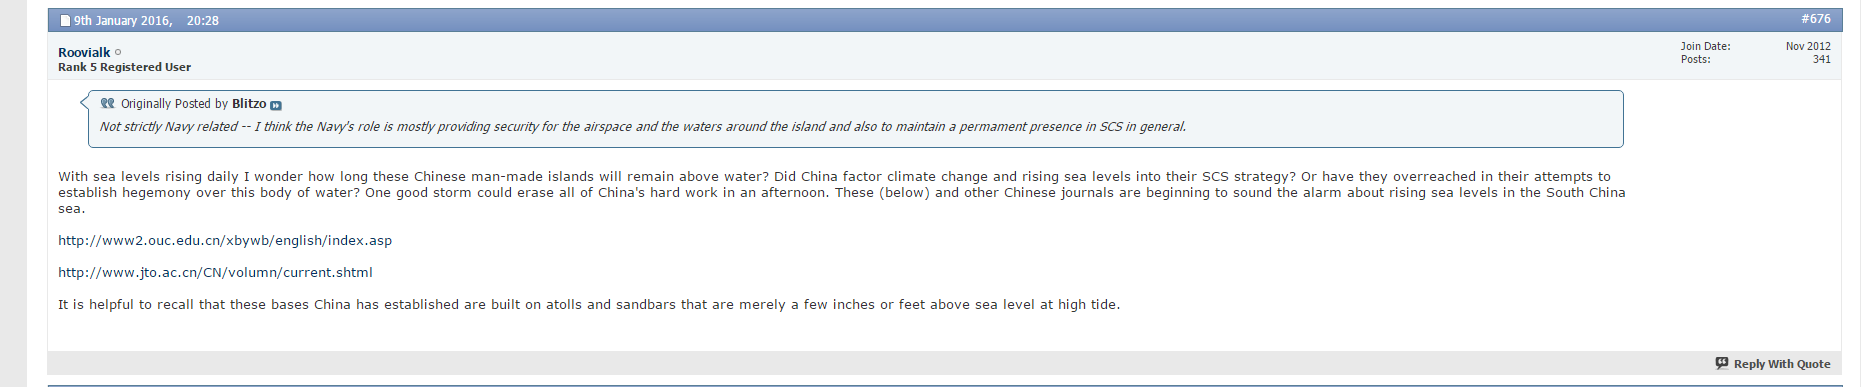 China build artificial islands in South China Sea - Page 4 Screen10